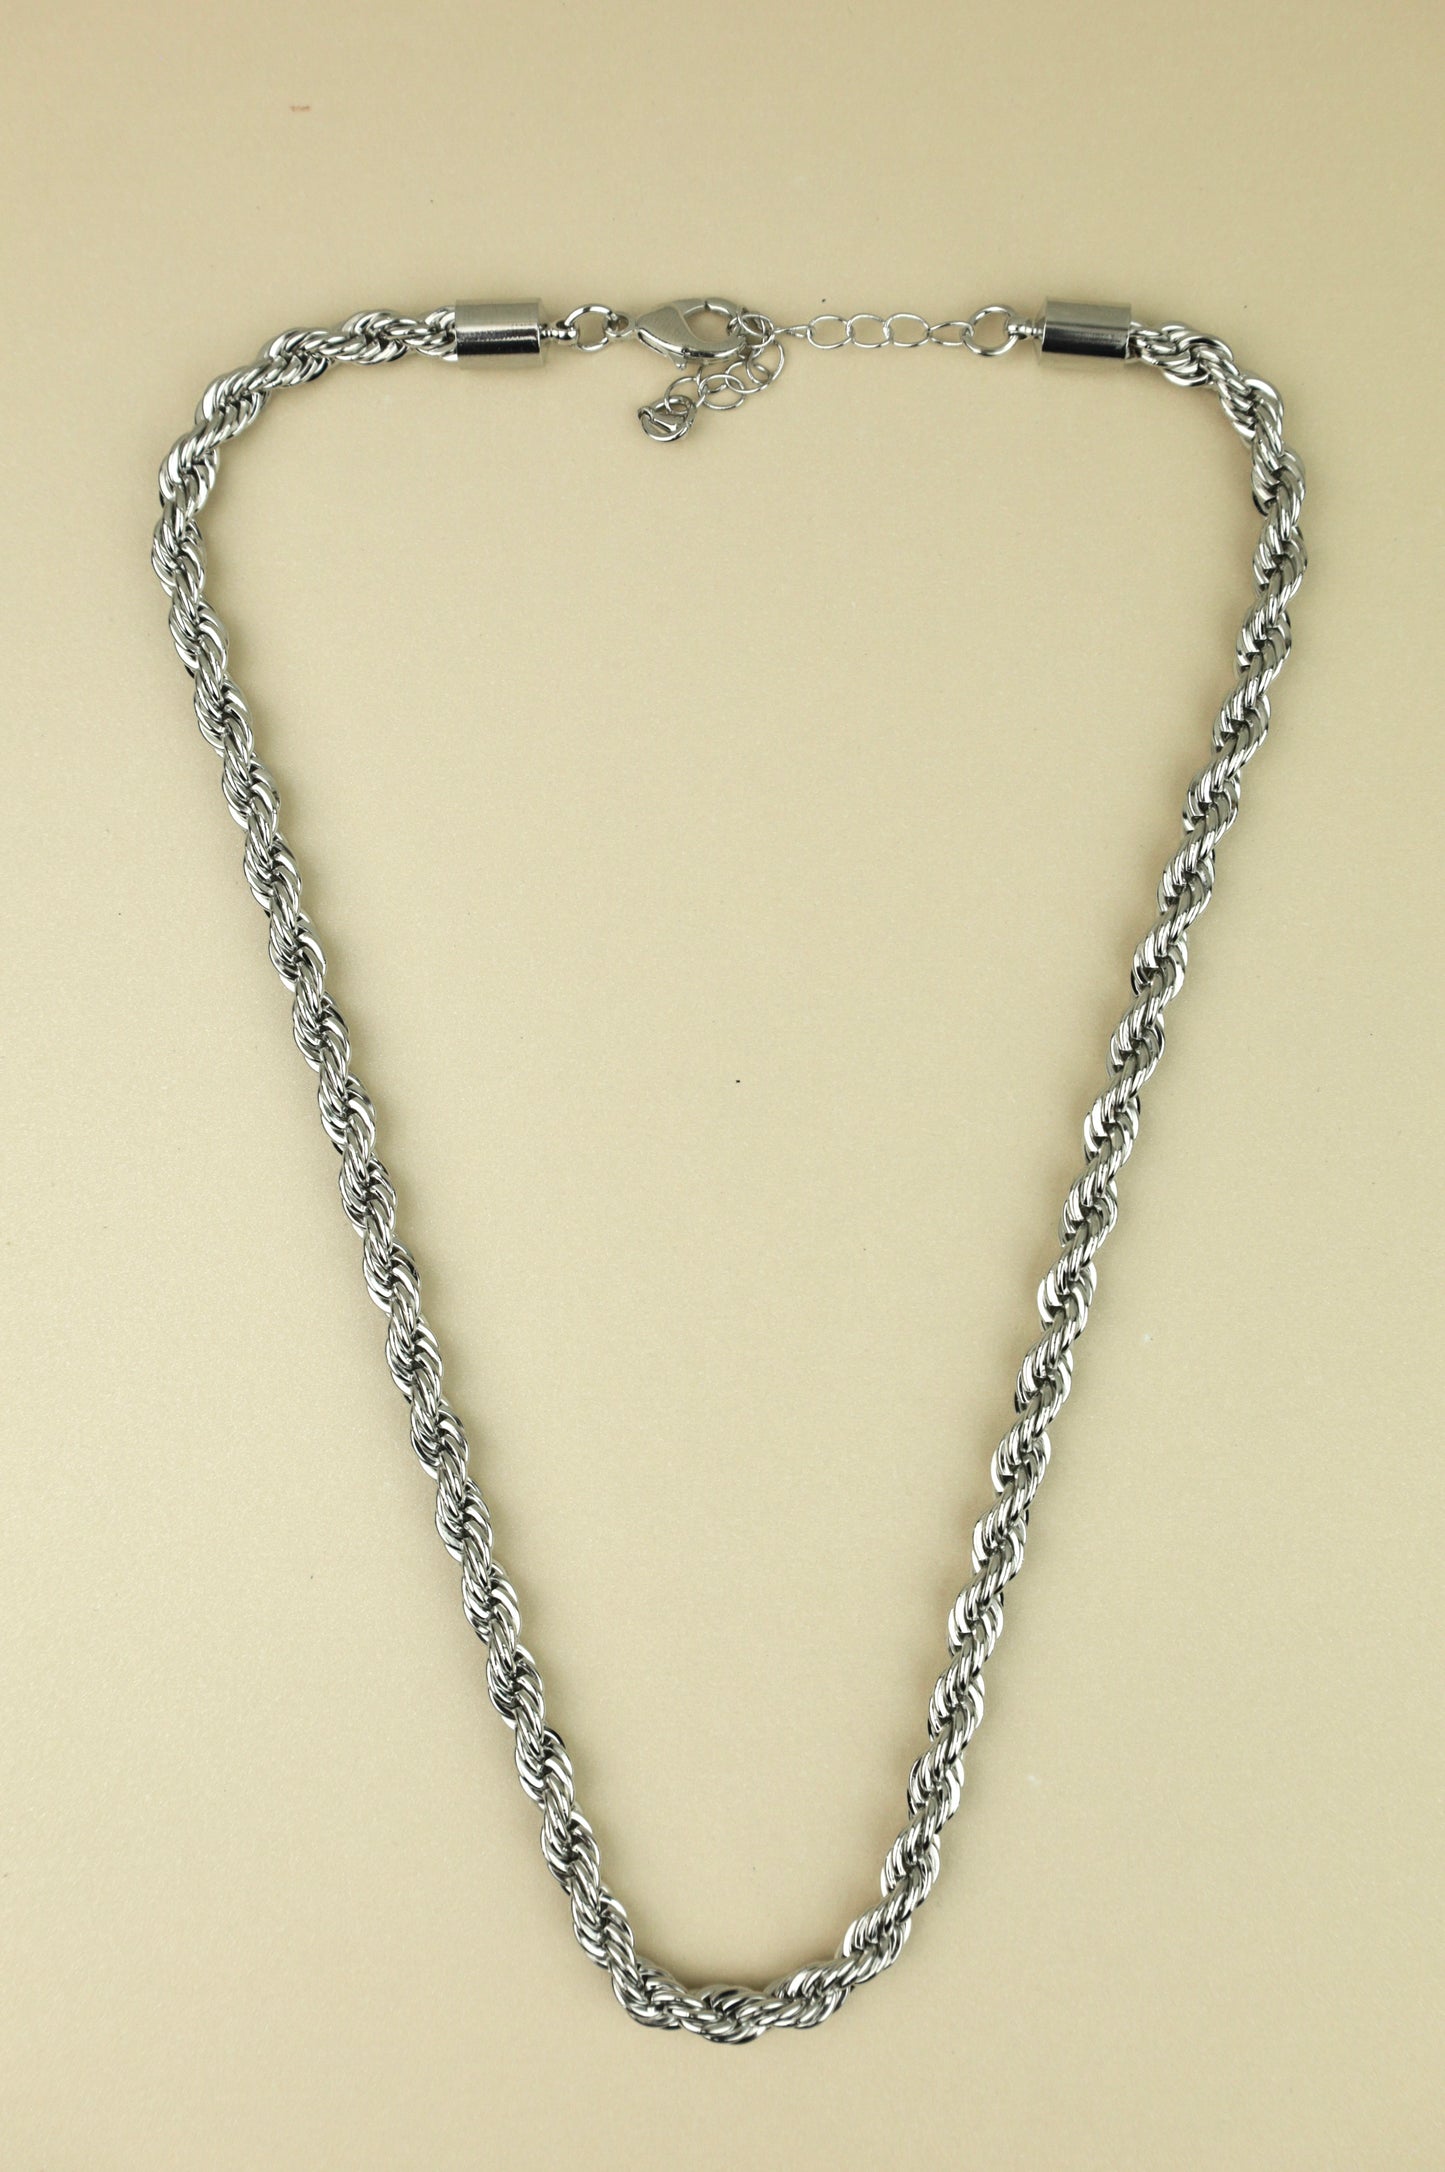 Ken Rope Necklace in silver